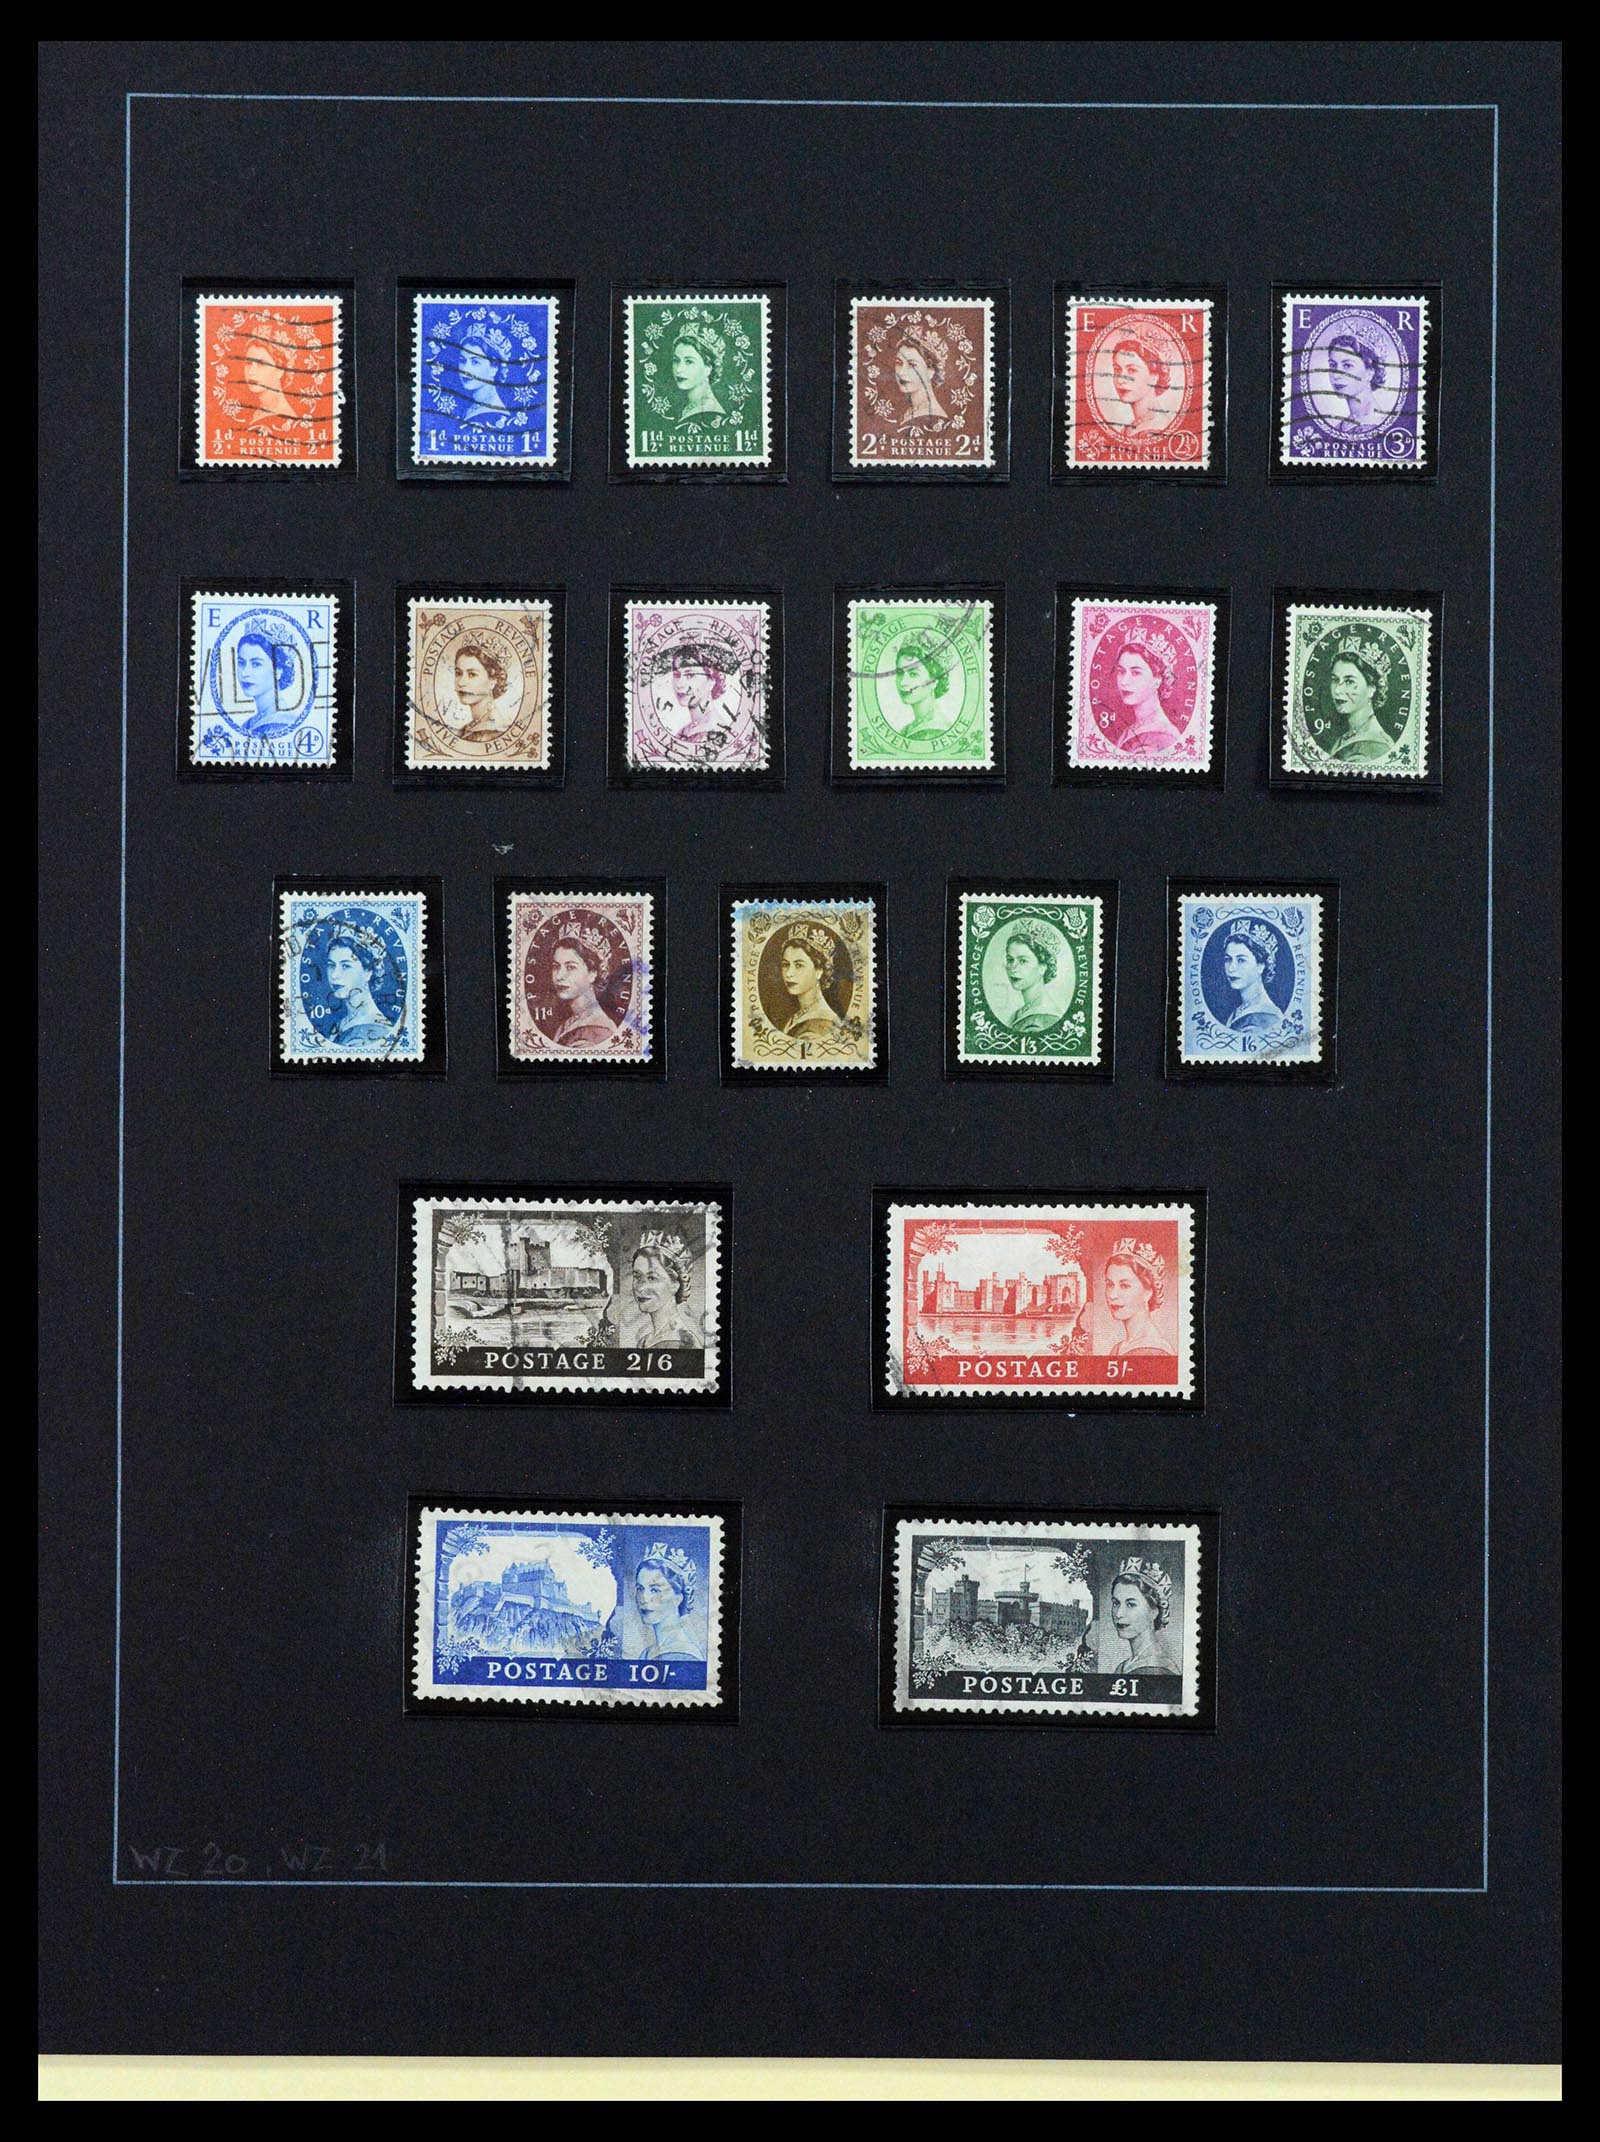 39375 0045 - Stamp collection 39375 Great Britain super collection 1840-1980.